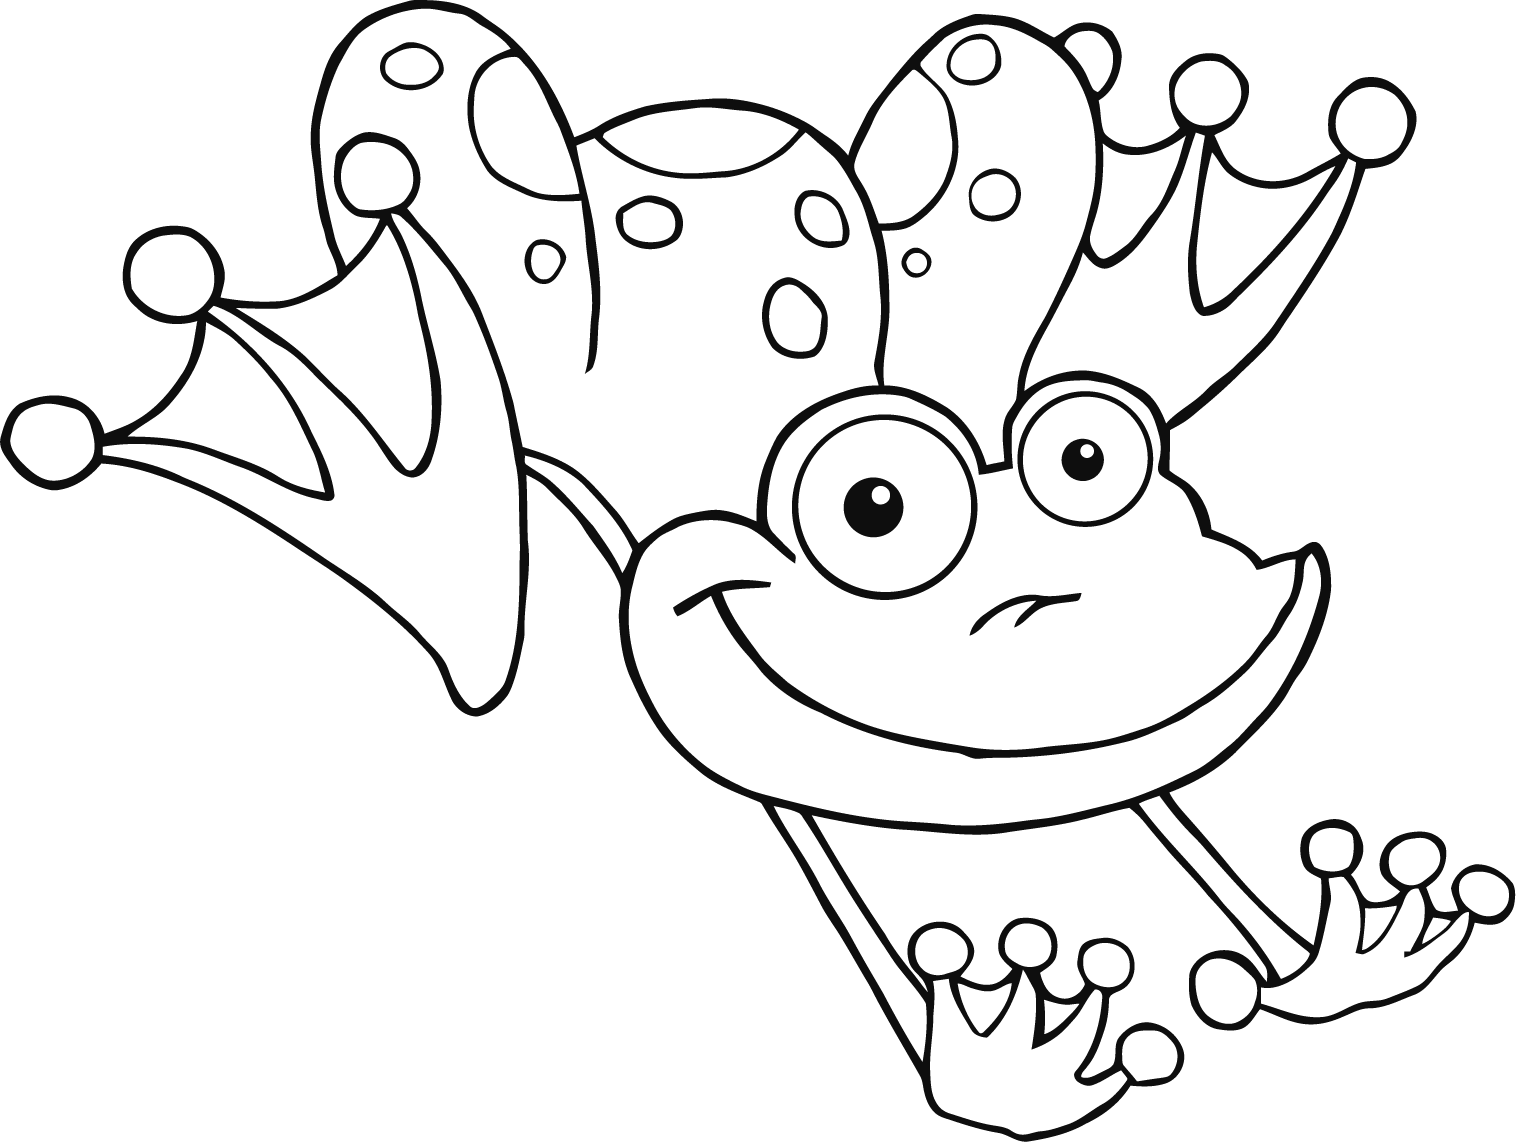 frog images to color free printable frog coloring pages for kids cool2bkids color to images frog 